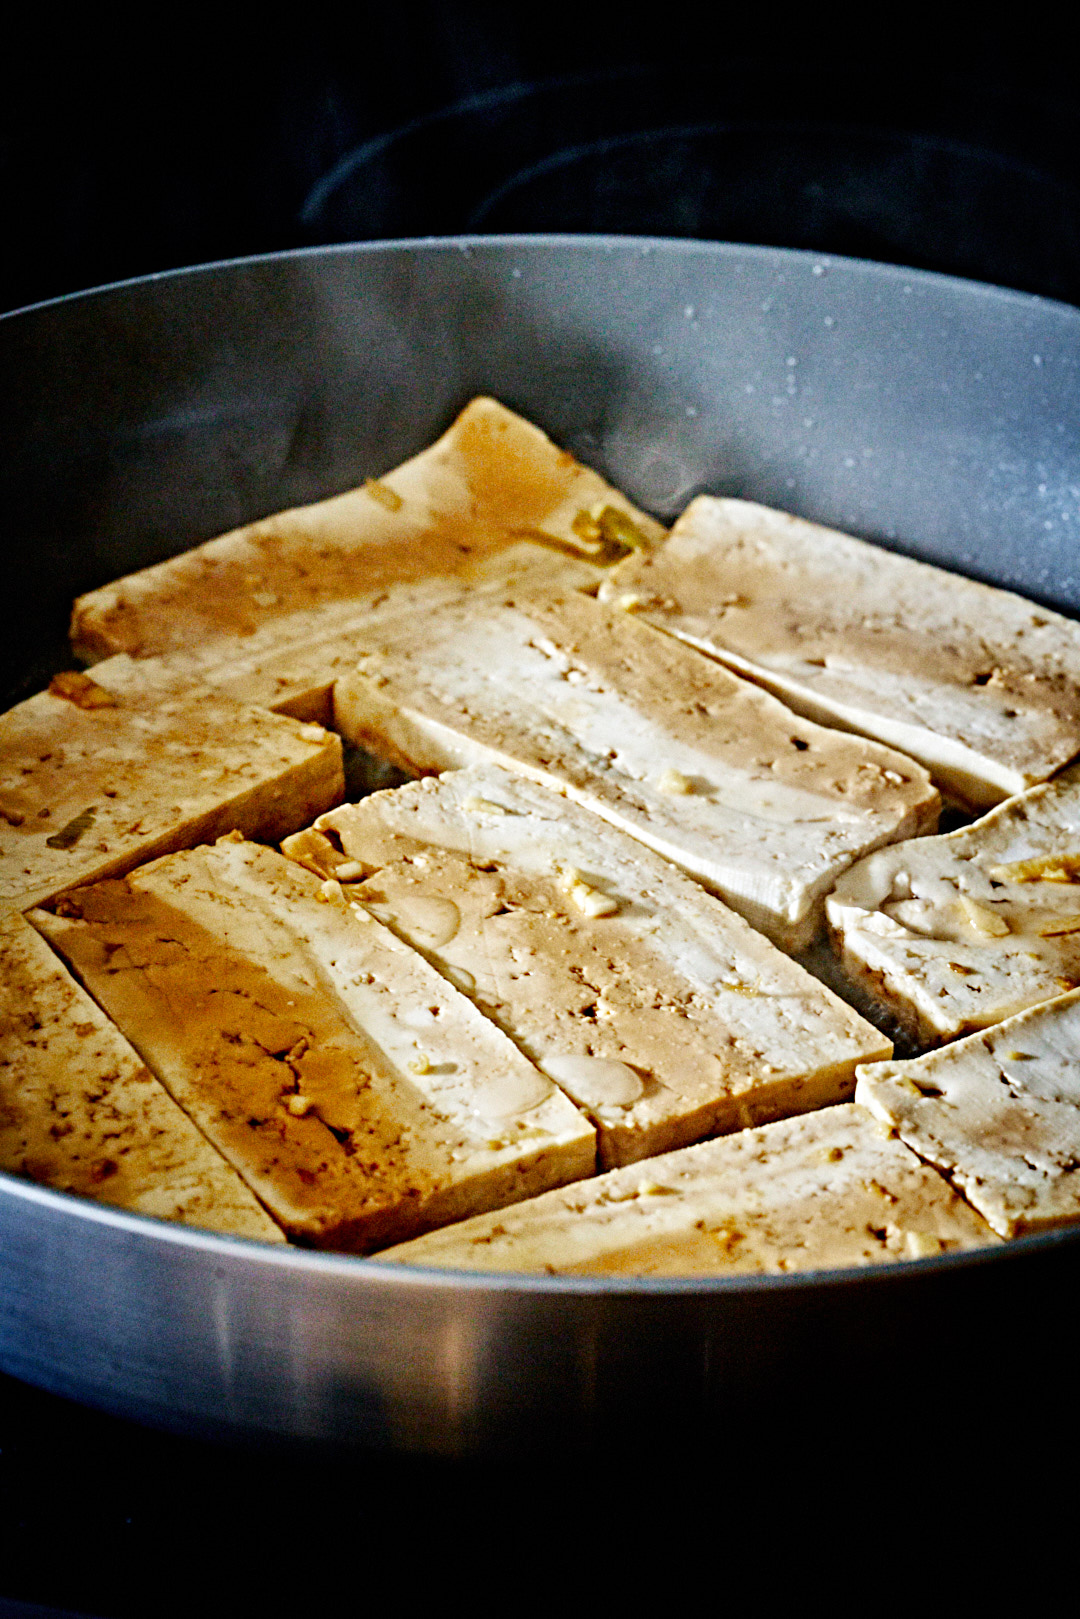 Marinated tofu cooking in a pan.